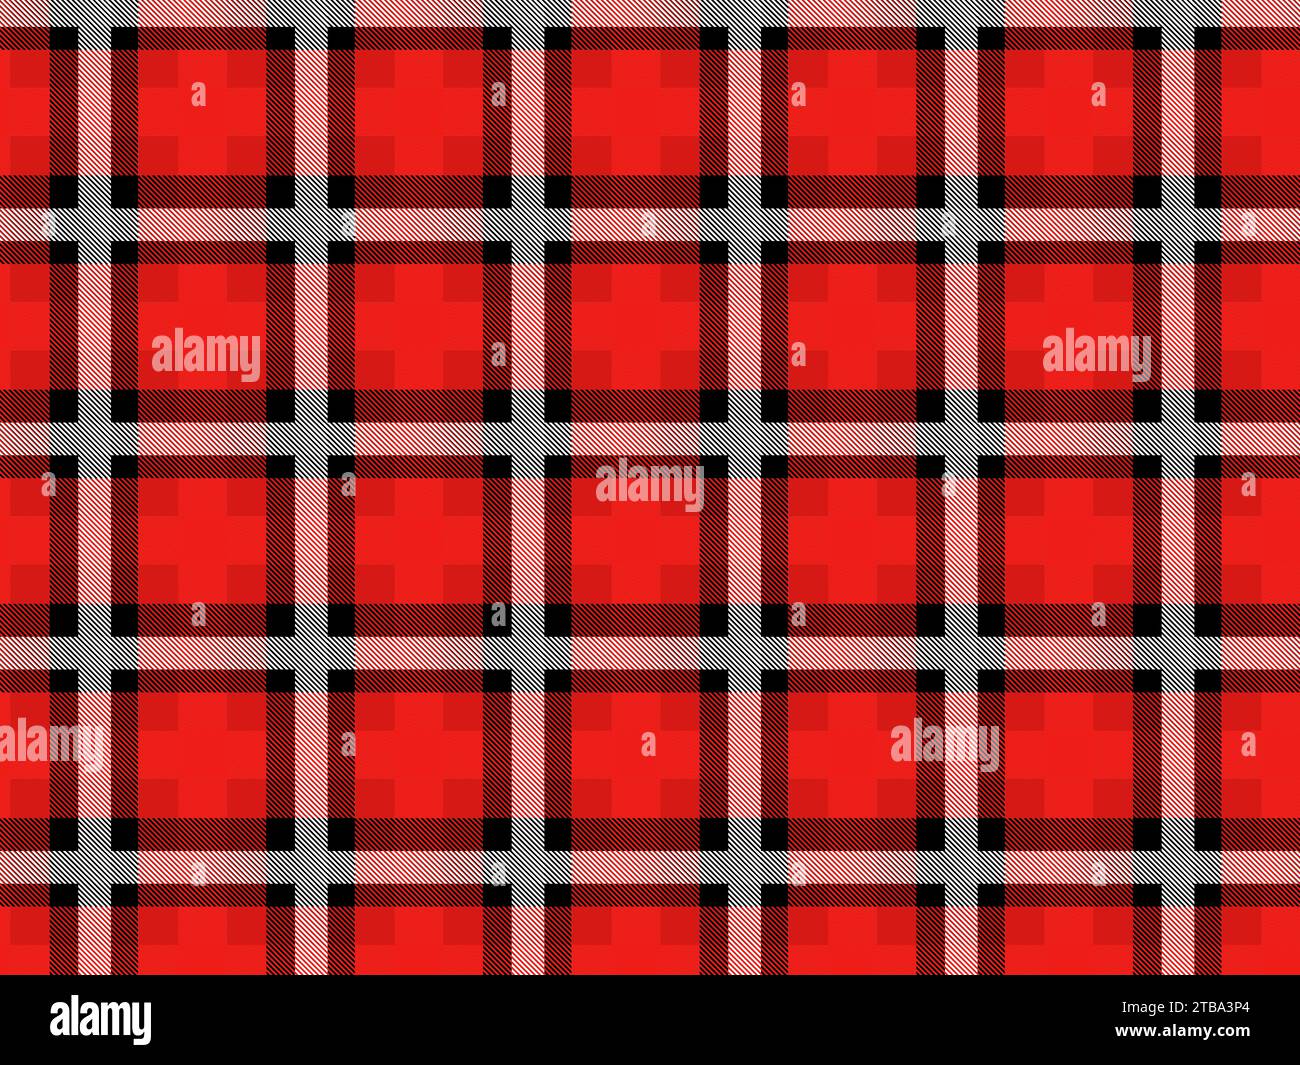 Christmas Plaid Vector Patterns, Shirt Fabric Textures Xmas Backgrounds, Pattern Tile Swatches Included Stock Vector